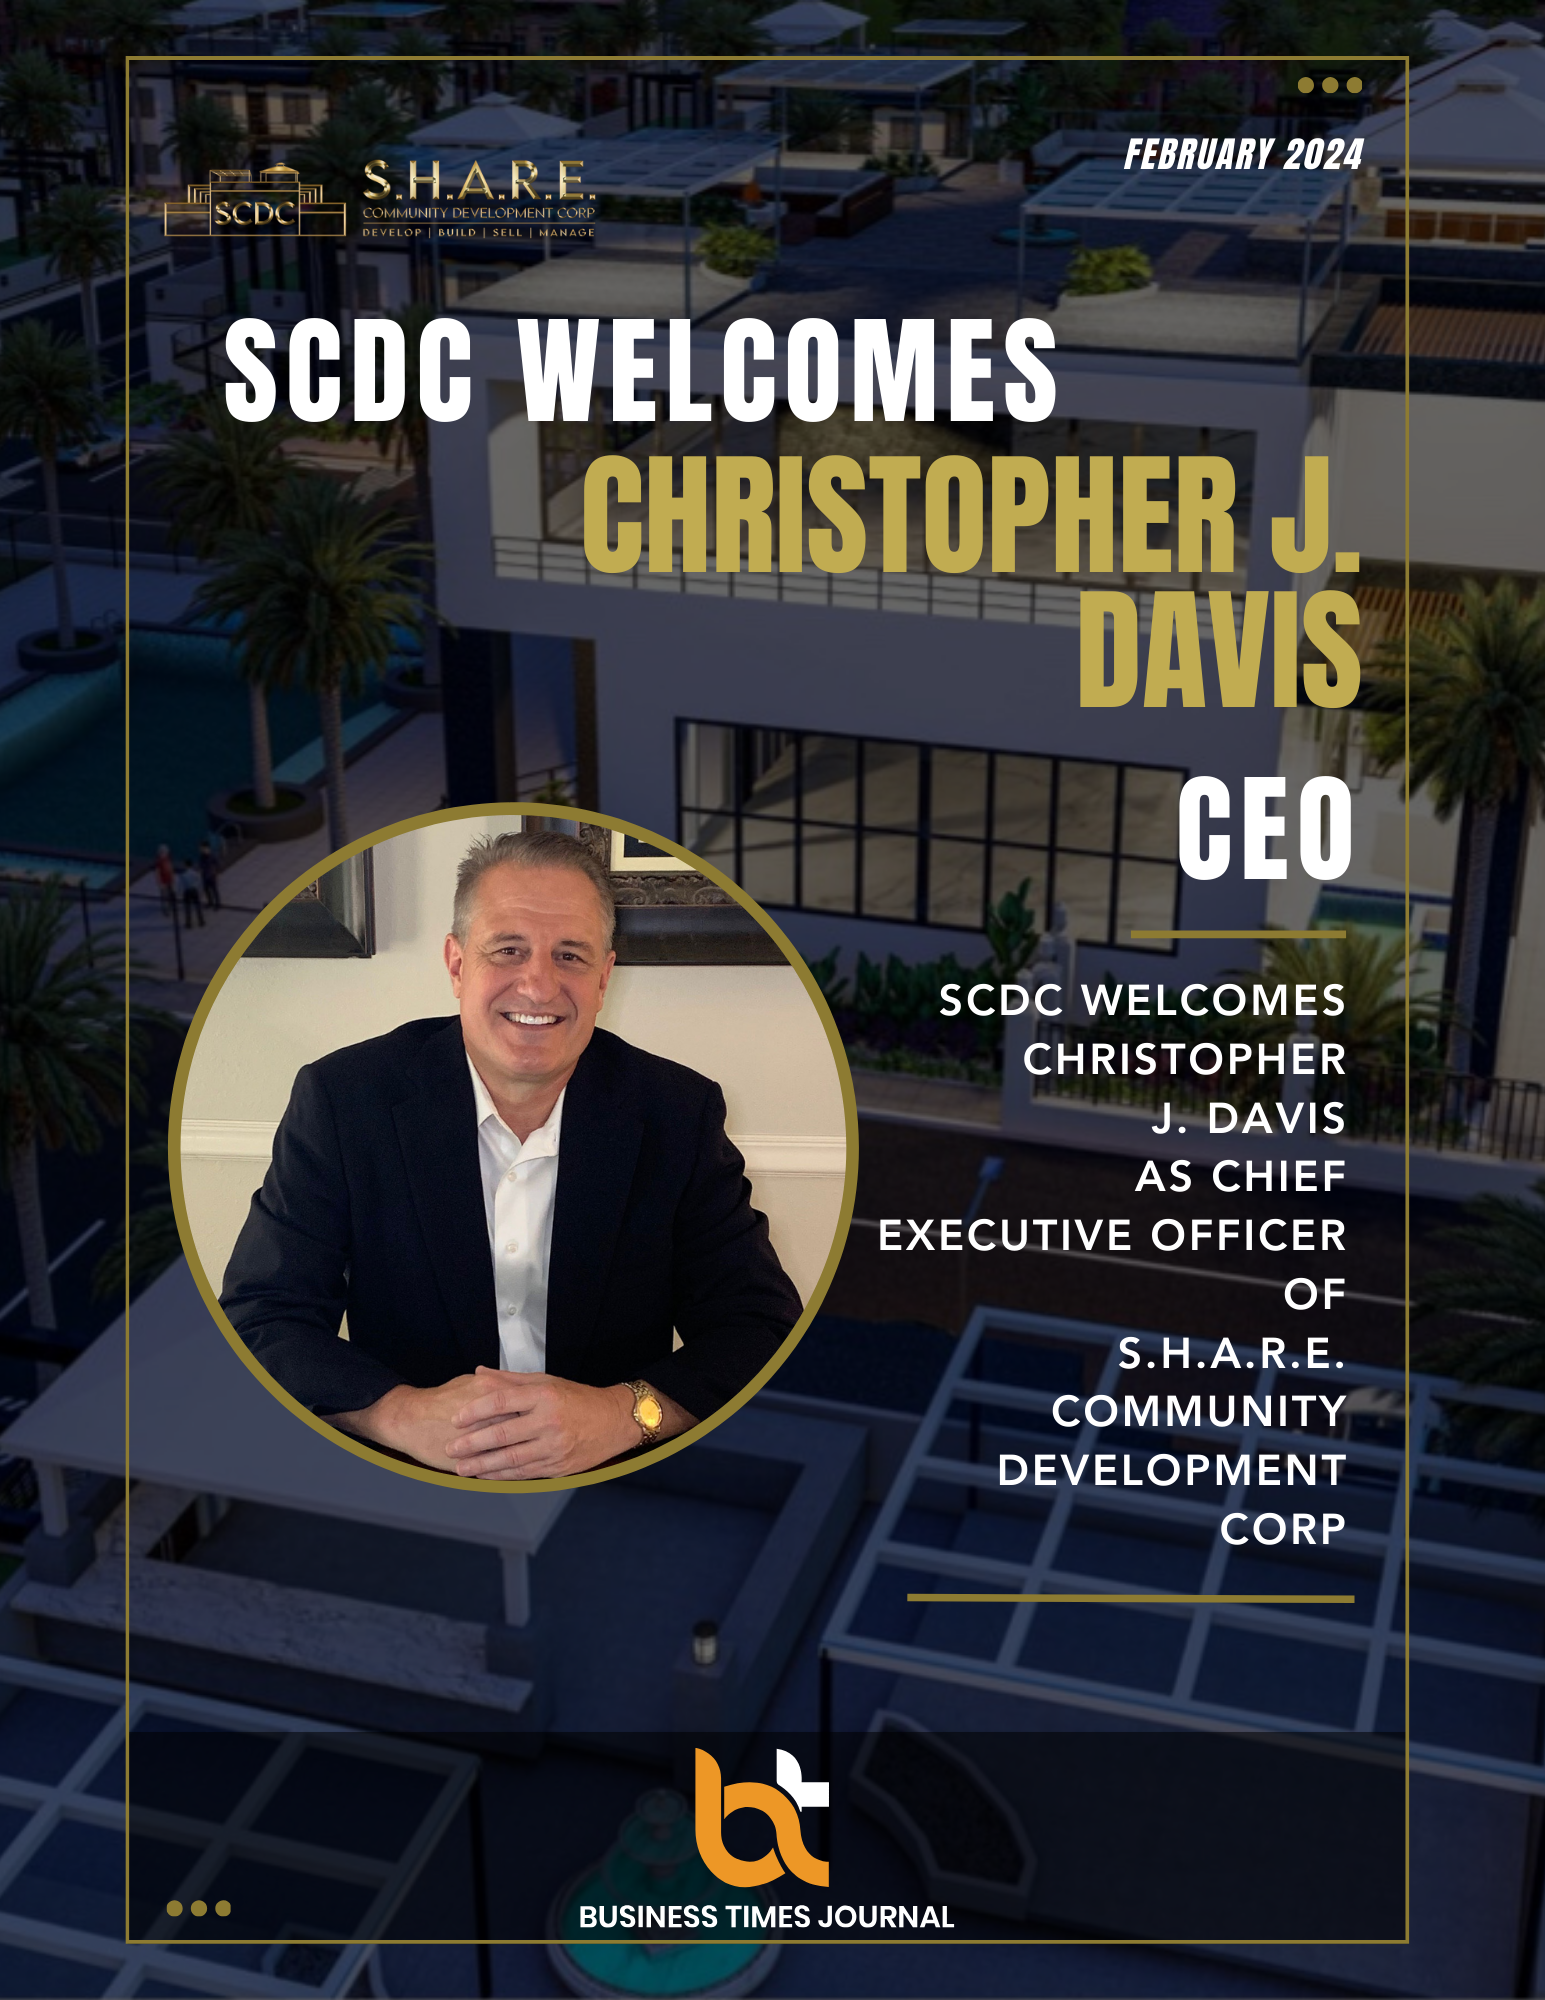 S.H.A.R.E. Community Development Corp Welcomes Christopher J. Davis as Chief Executive Officer